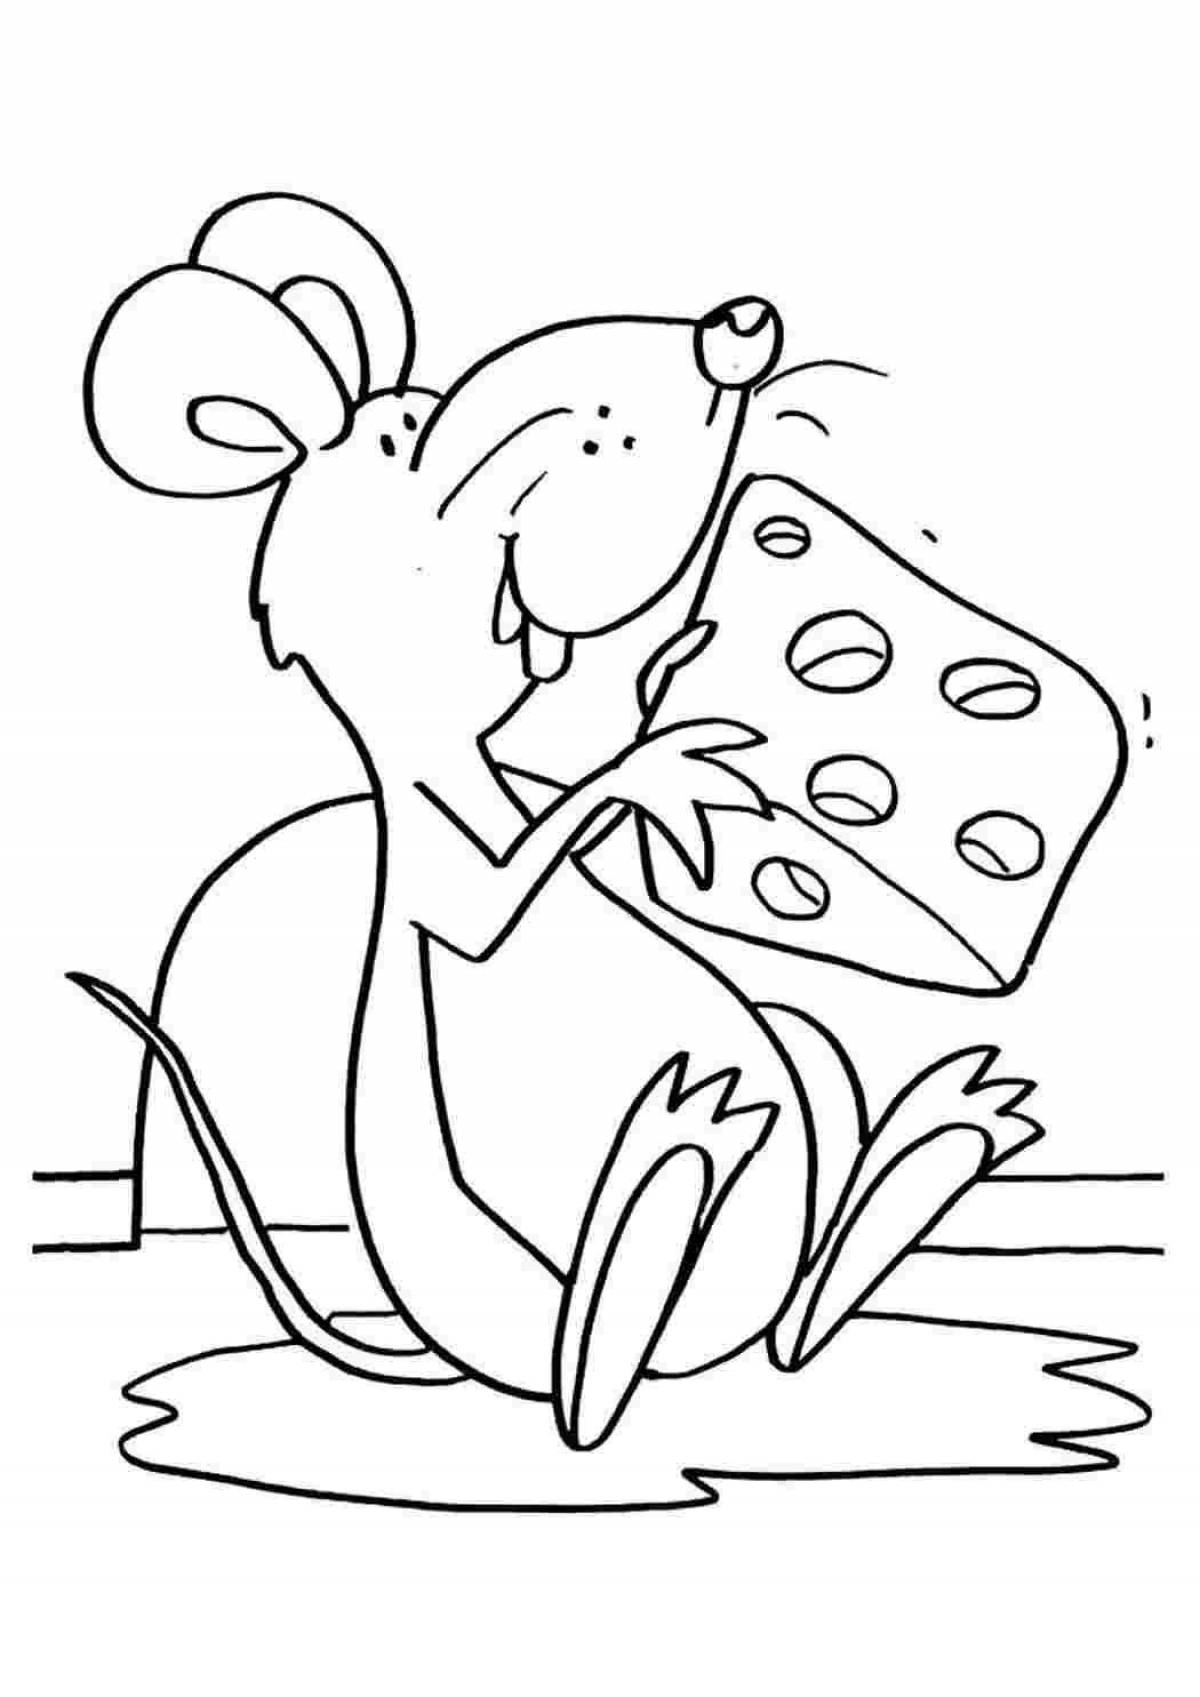 Live mouse with cheese coloring